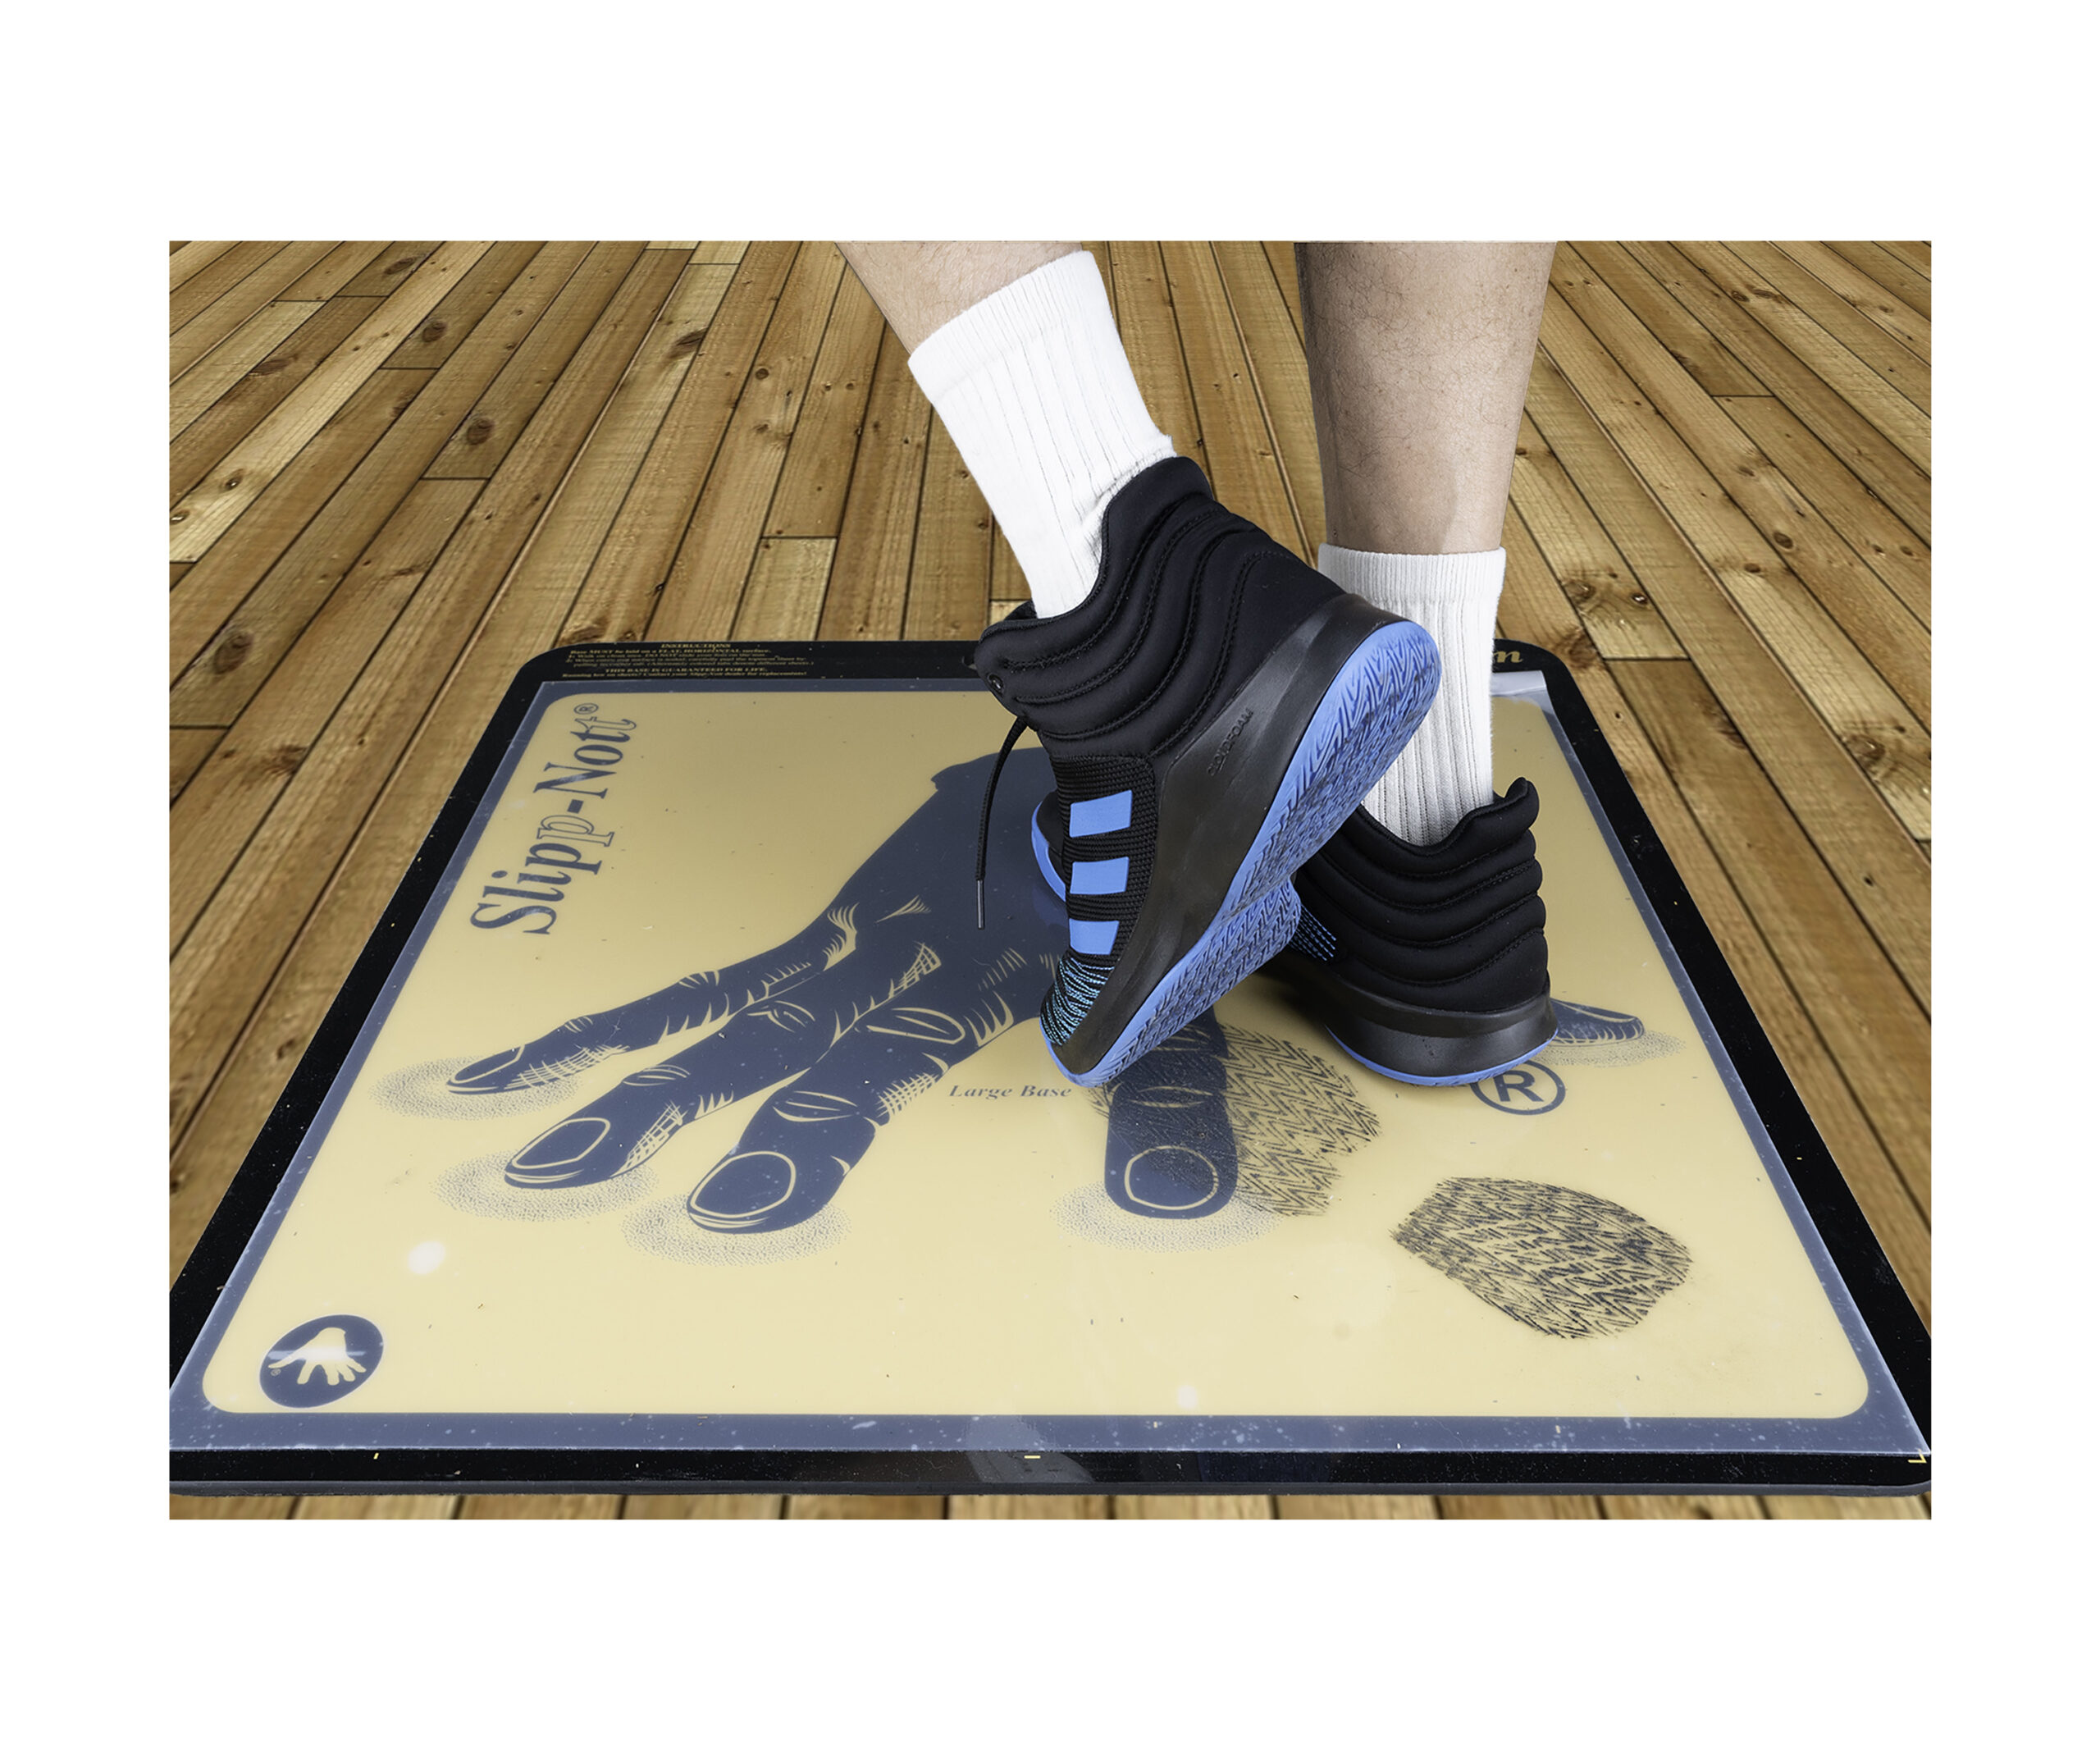 StepNGrip Model Courtside Shoe Grip Traction Mat - Basic Model with Sticky  Mat - Uses Replacement 15x 18 Sheets - Allows Court Grip for Basketball  Volleyball - Sticky Stop Power 